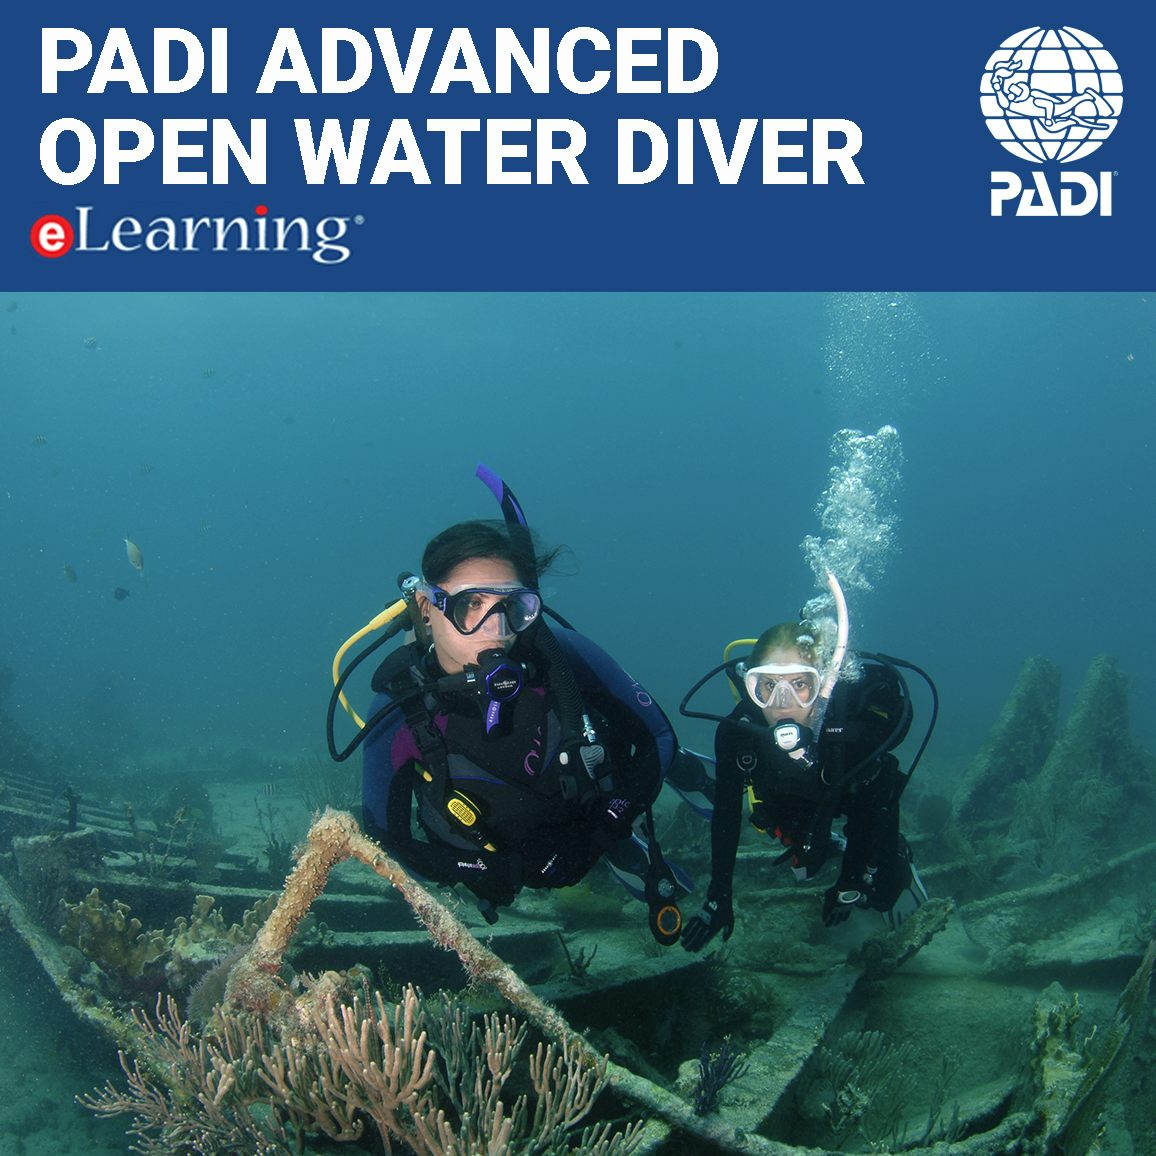 PADI Advanced Open Water Diver eLearning Online Course